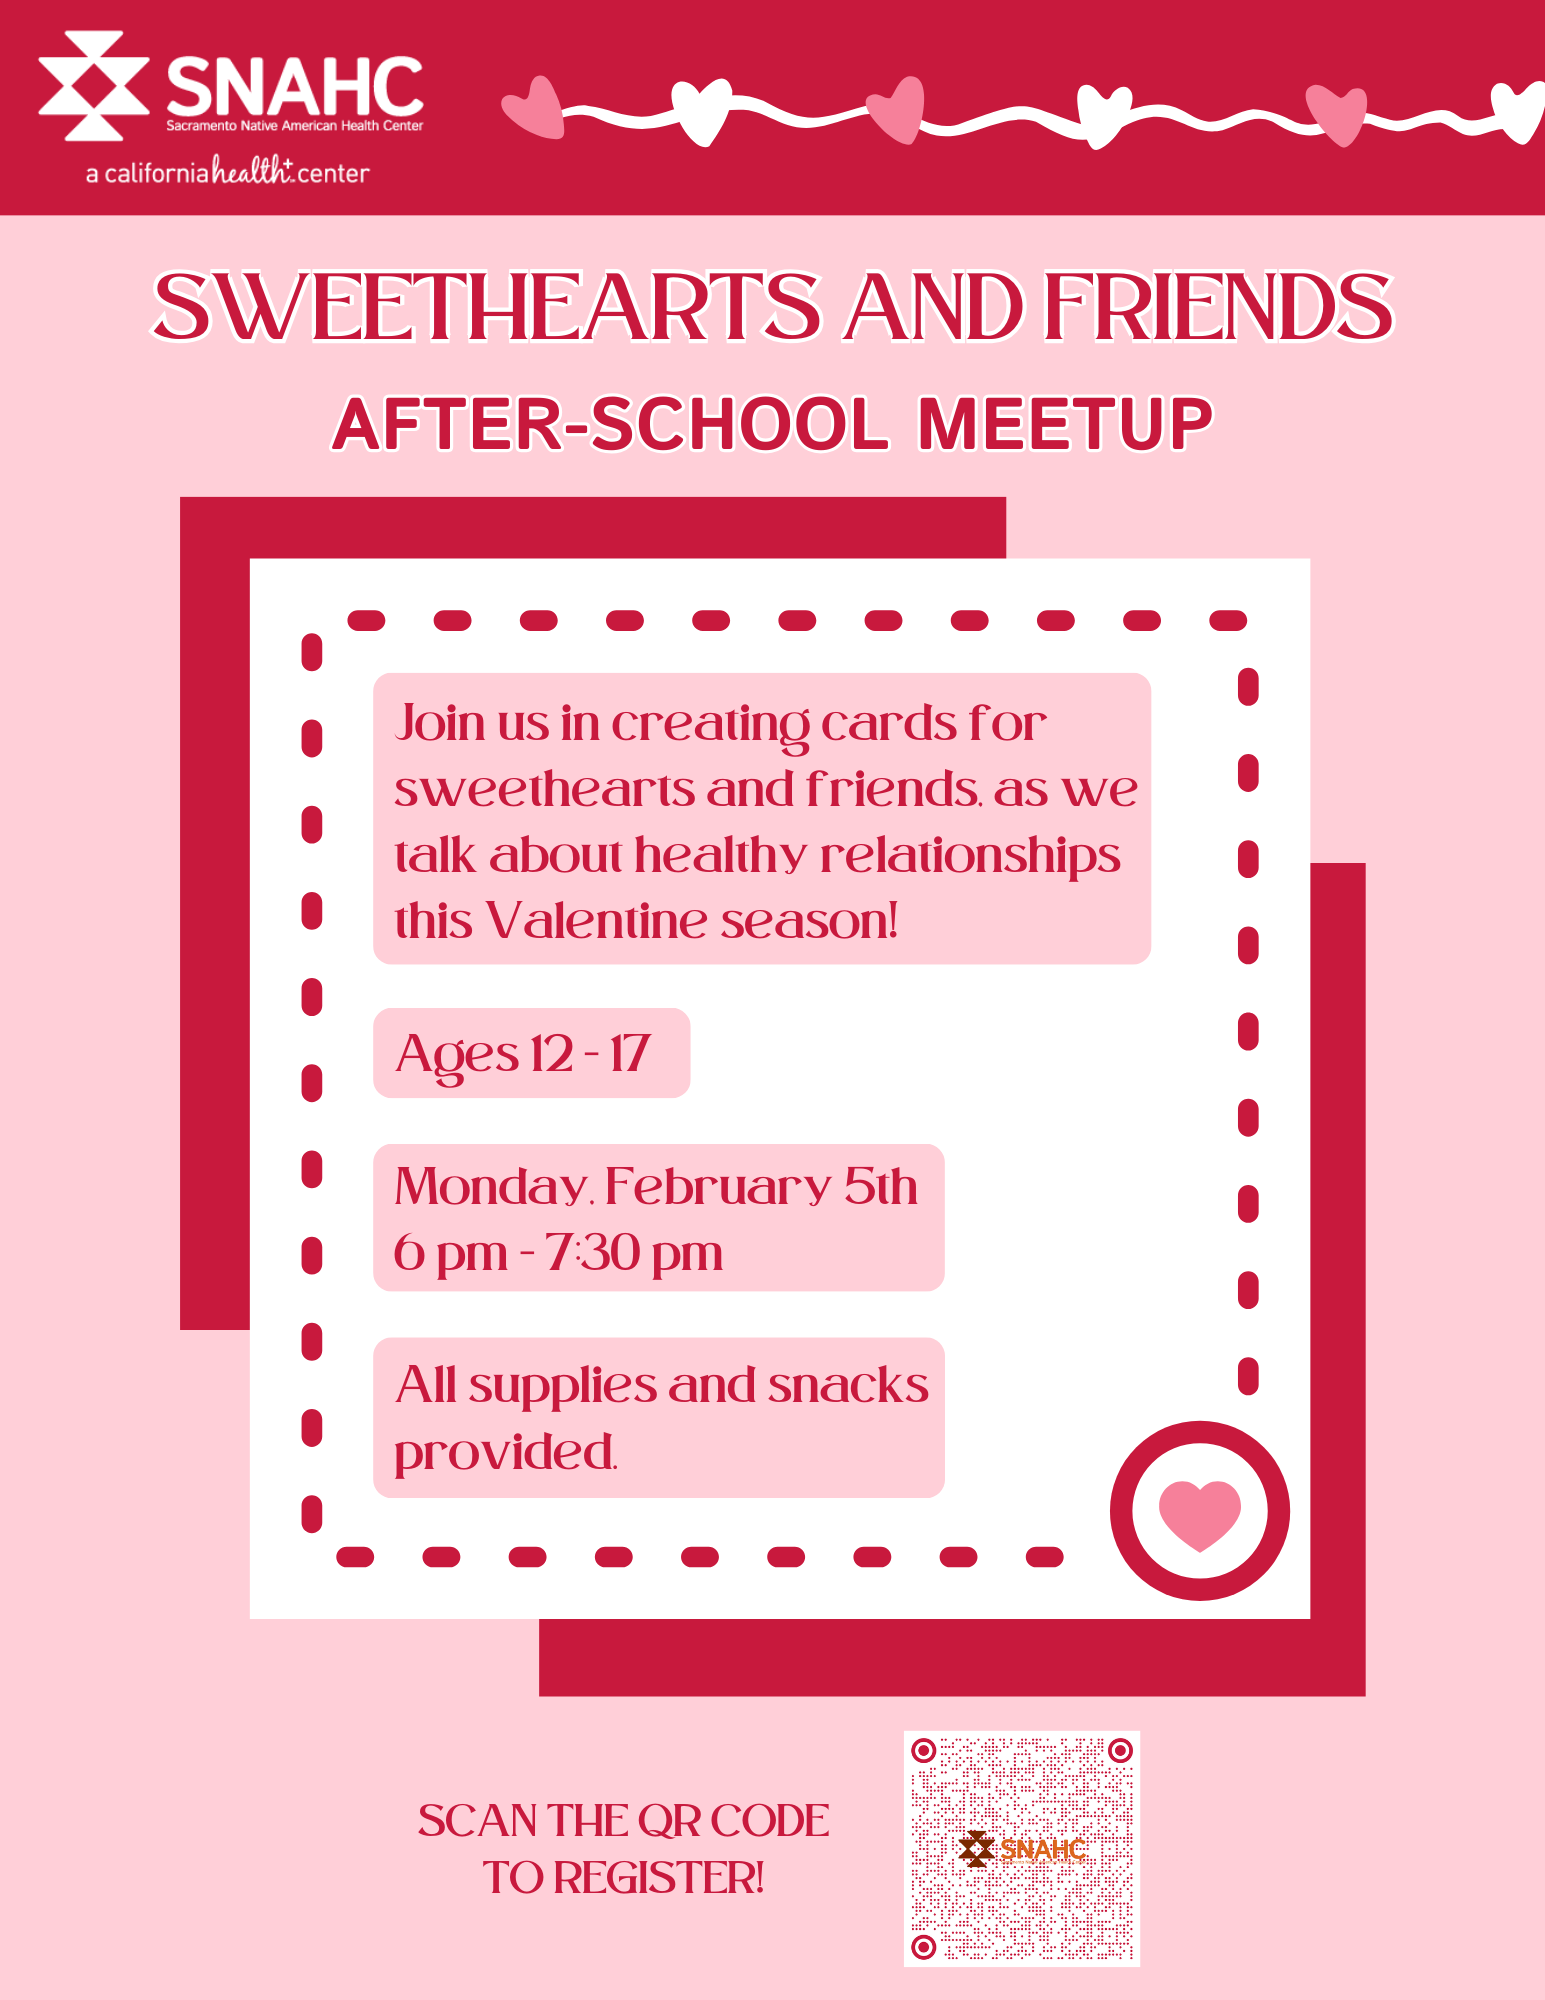 Sweethearts and Friends After-School Meetup Flyer for ages 12-17. Taking place on Monday, February 5th, from 6:00 pm to 7:30 pm at SNAHC Florin Road.